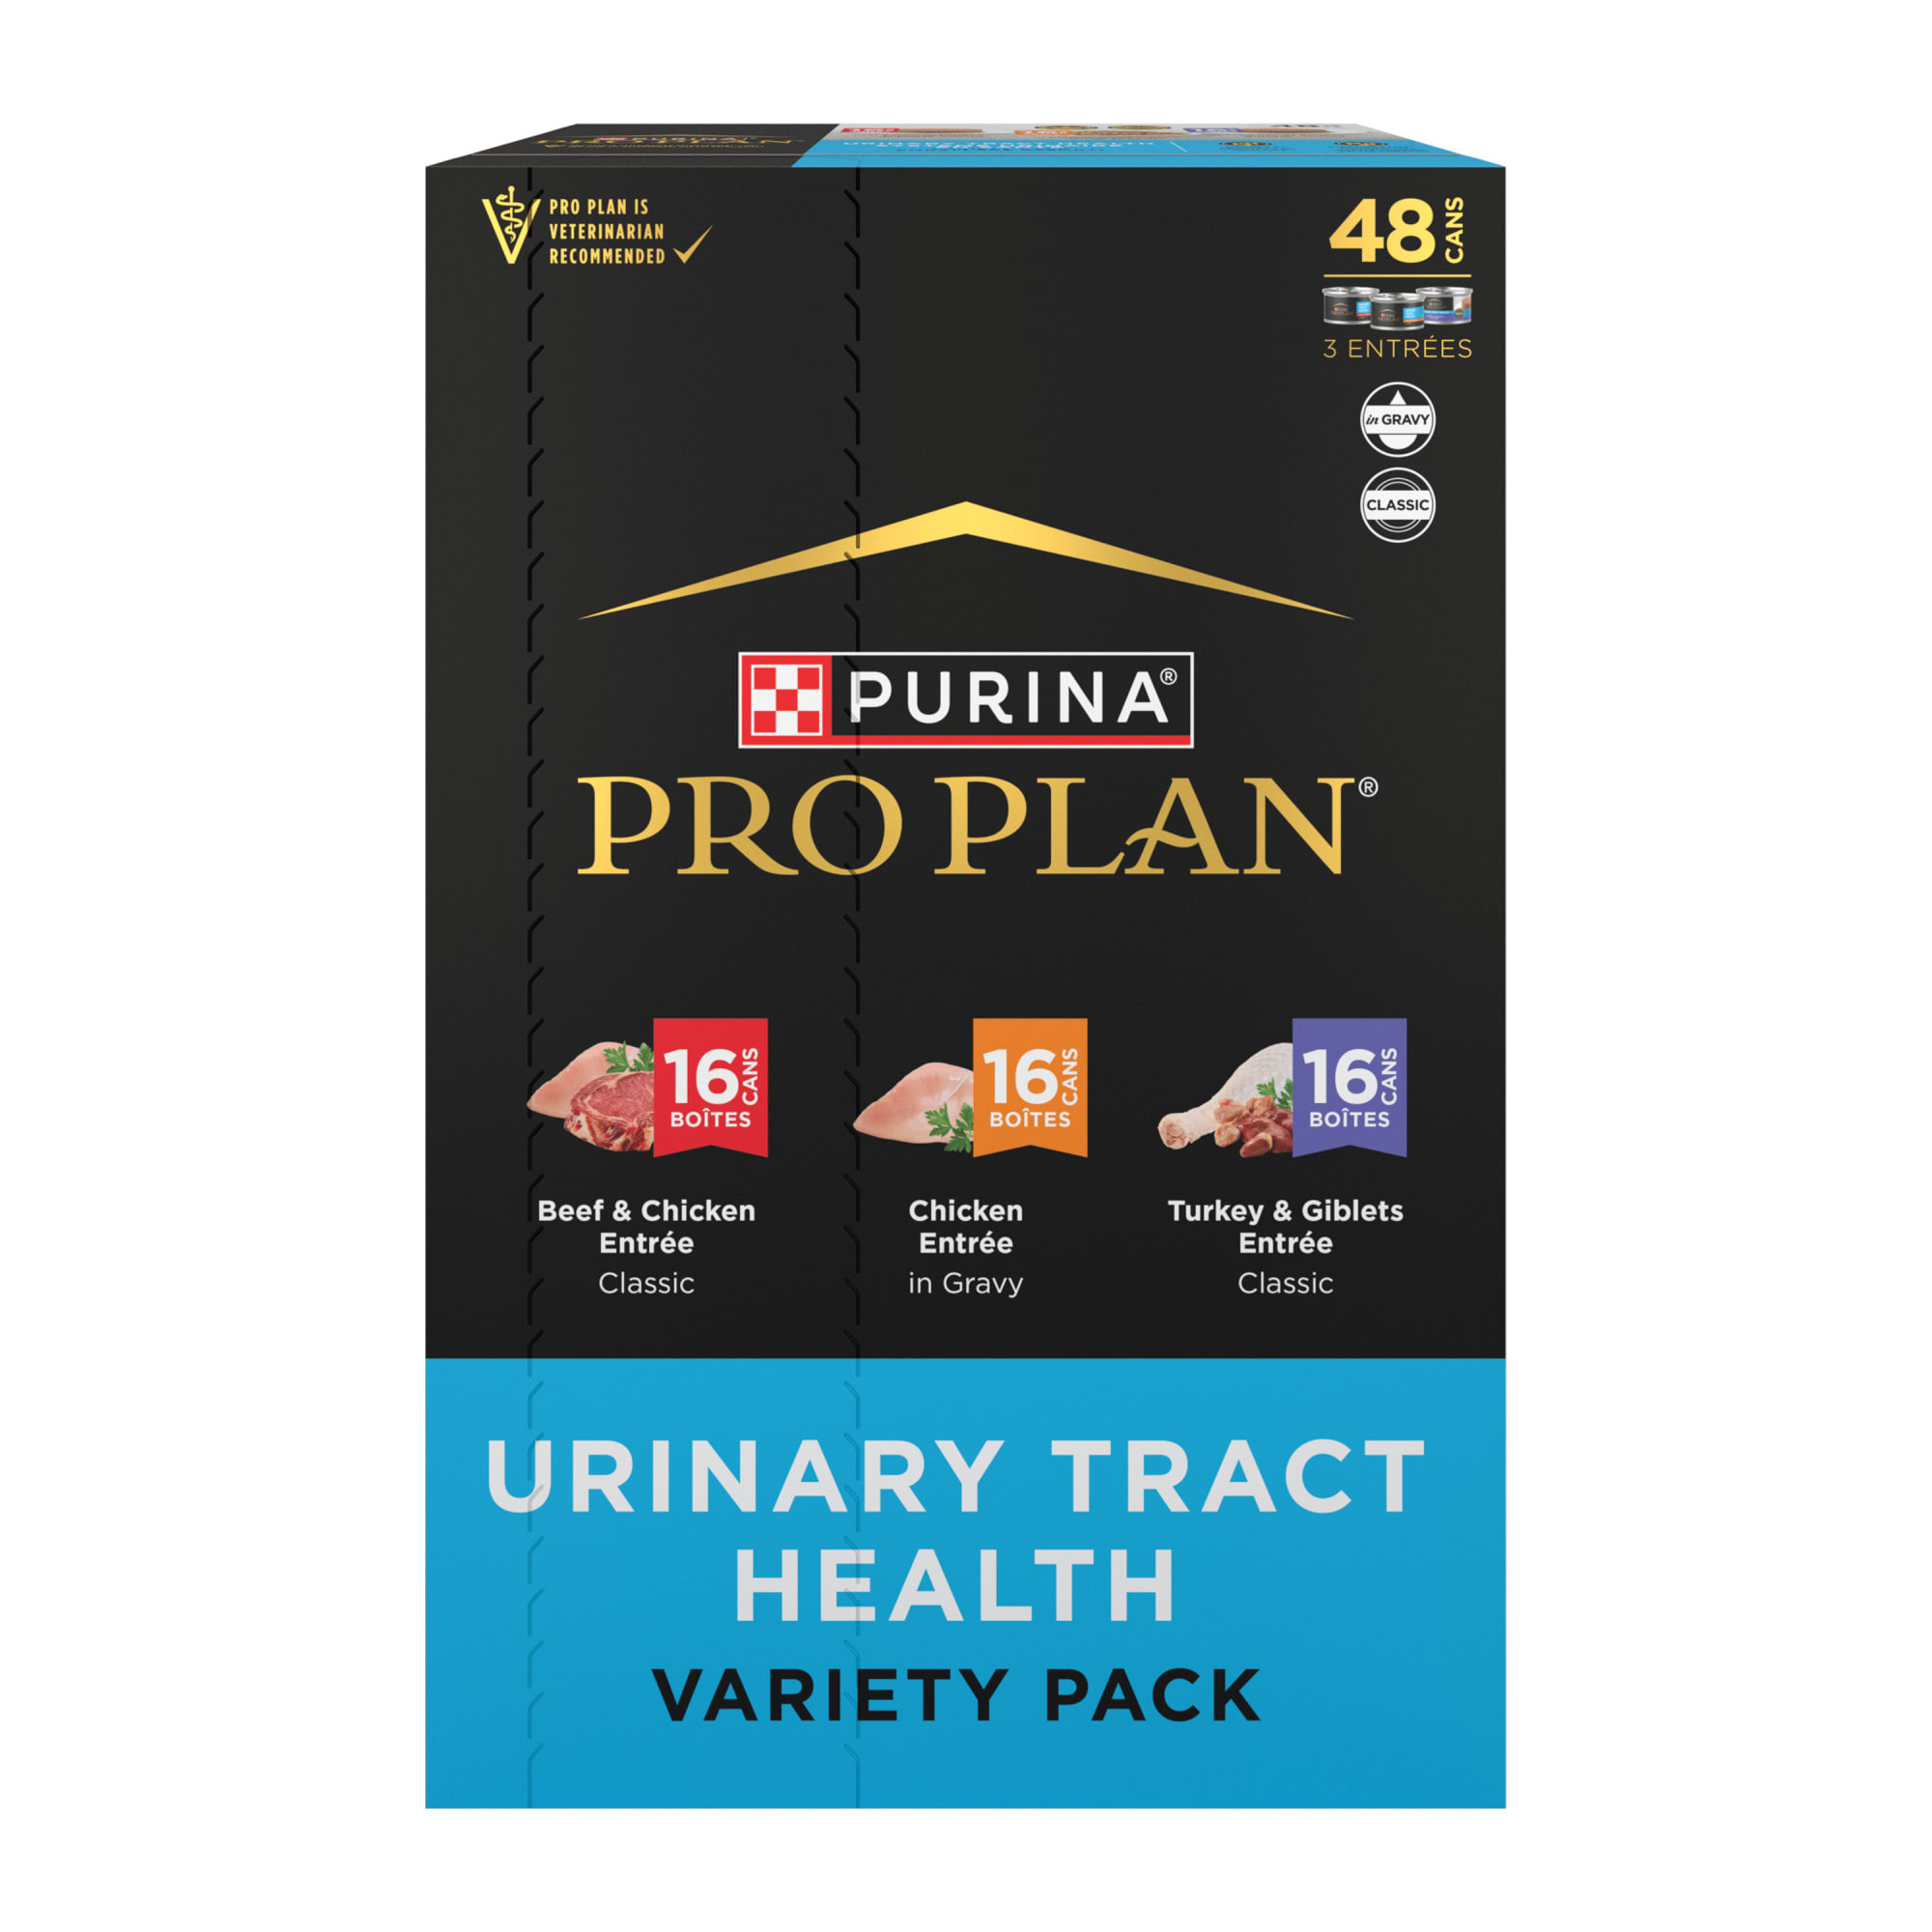 purina-pro-plan-urinary-tract-chicken-beef-and-chicken-turkey-and